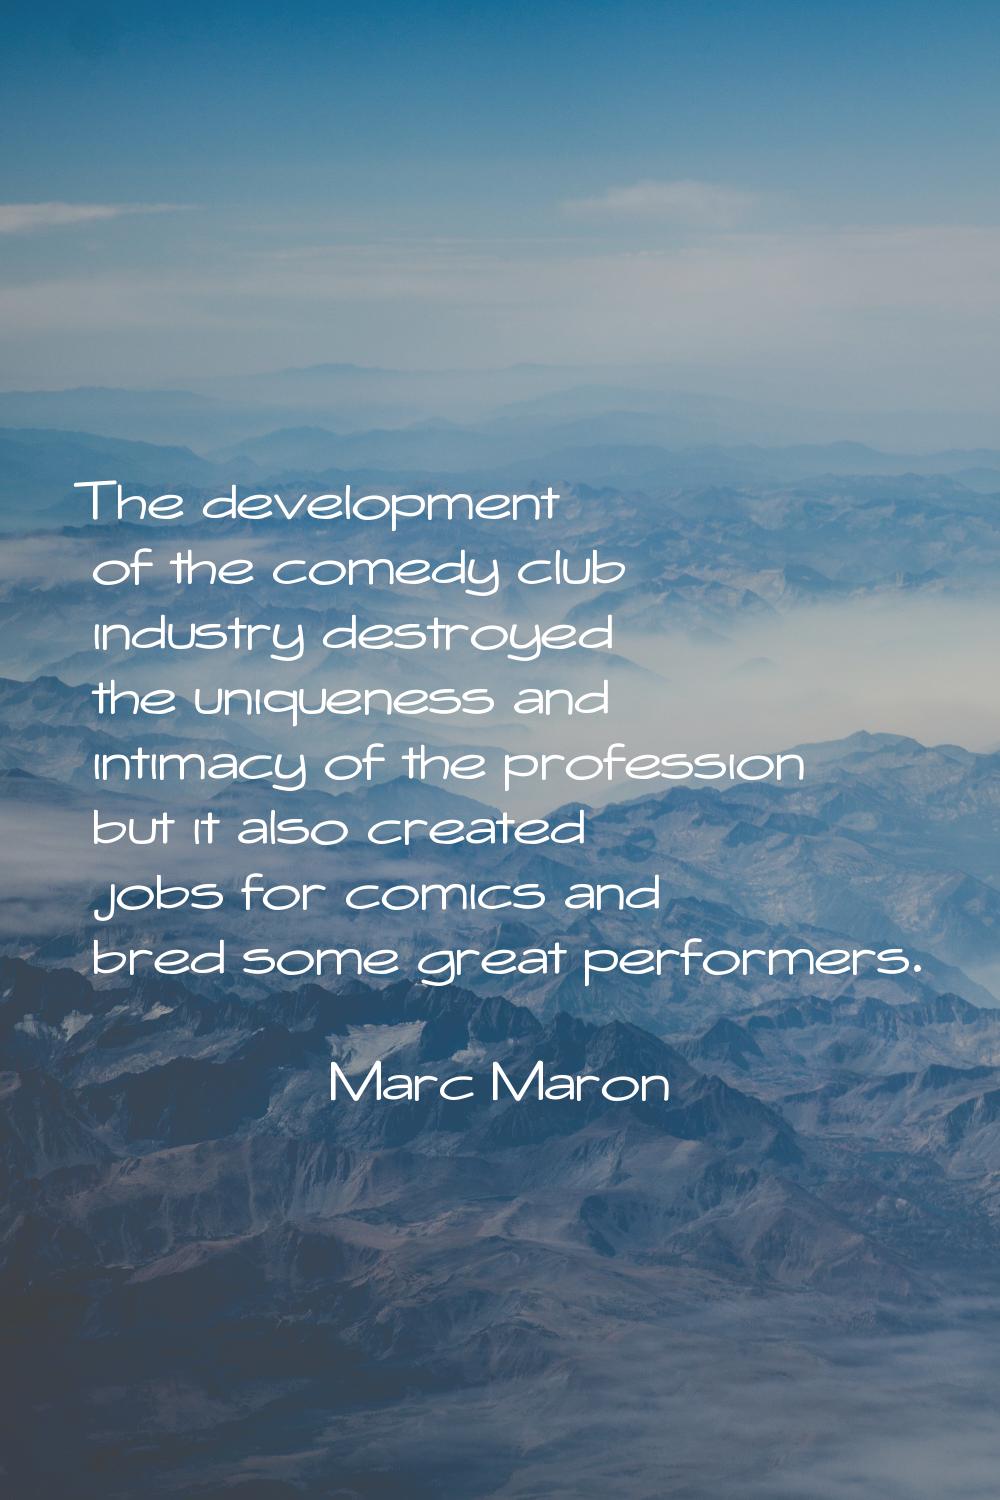 The development of the comedy club industry destroyed the uniqueness and intimacy of the profession